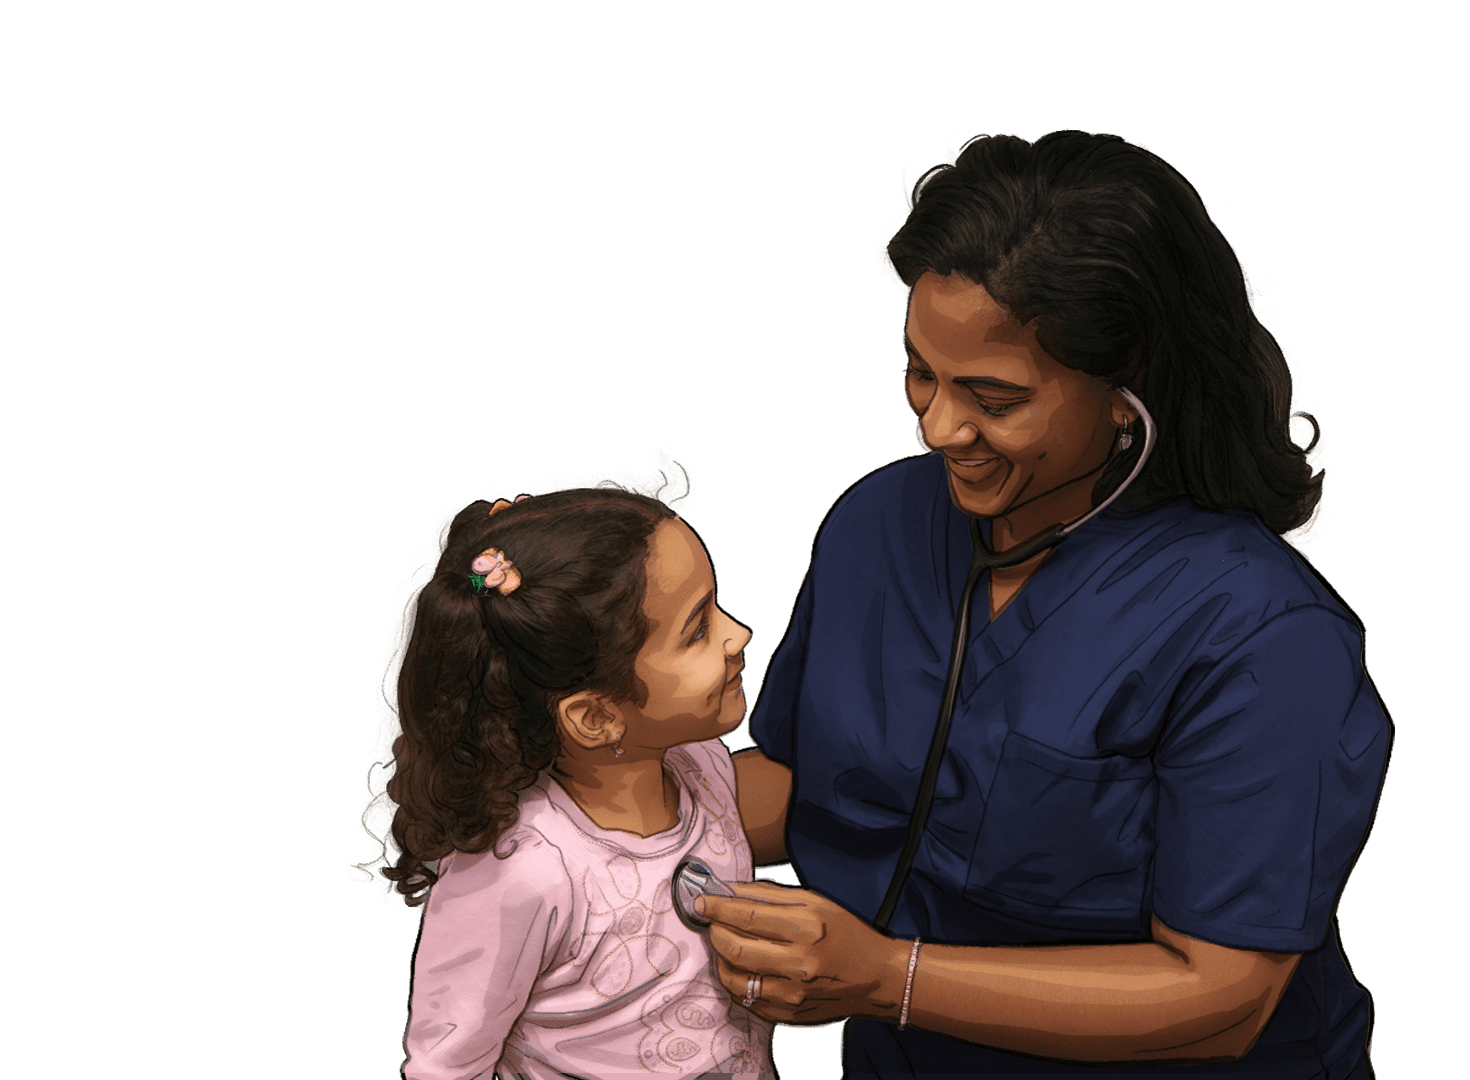 A sketch of a Medical Assistant listening to a child's heartbeat through a stethoscope, which is becoming more photorealistic.